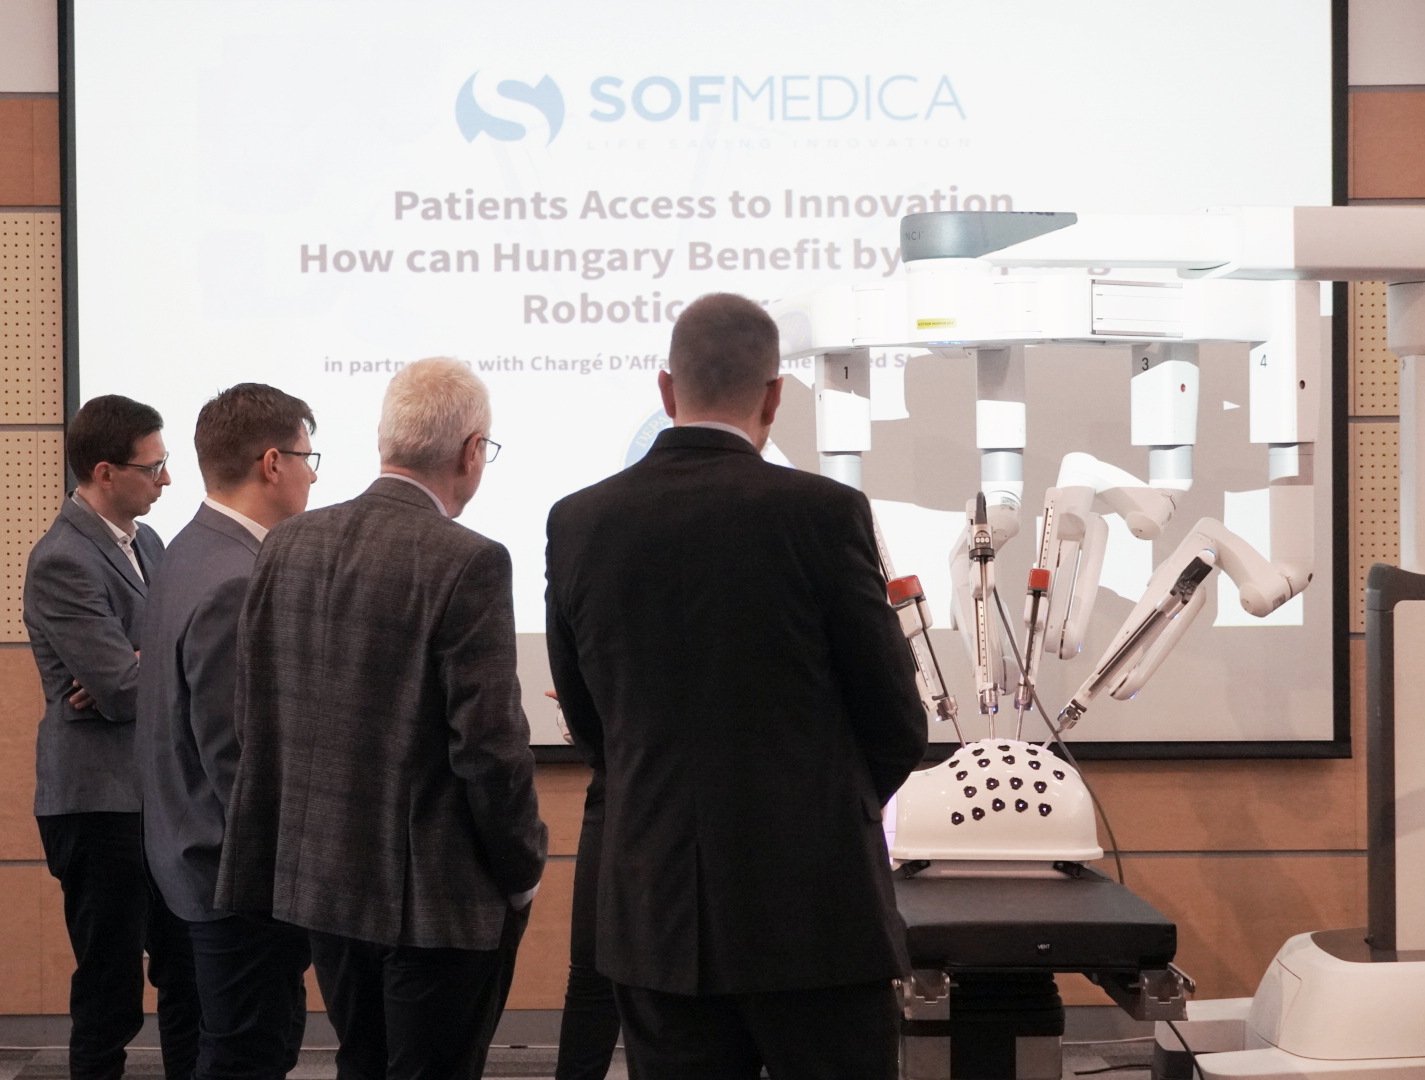 SOFMEDICA unveils the robotic surgery potential in Hungary